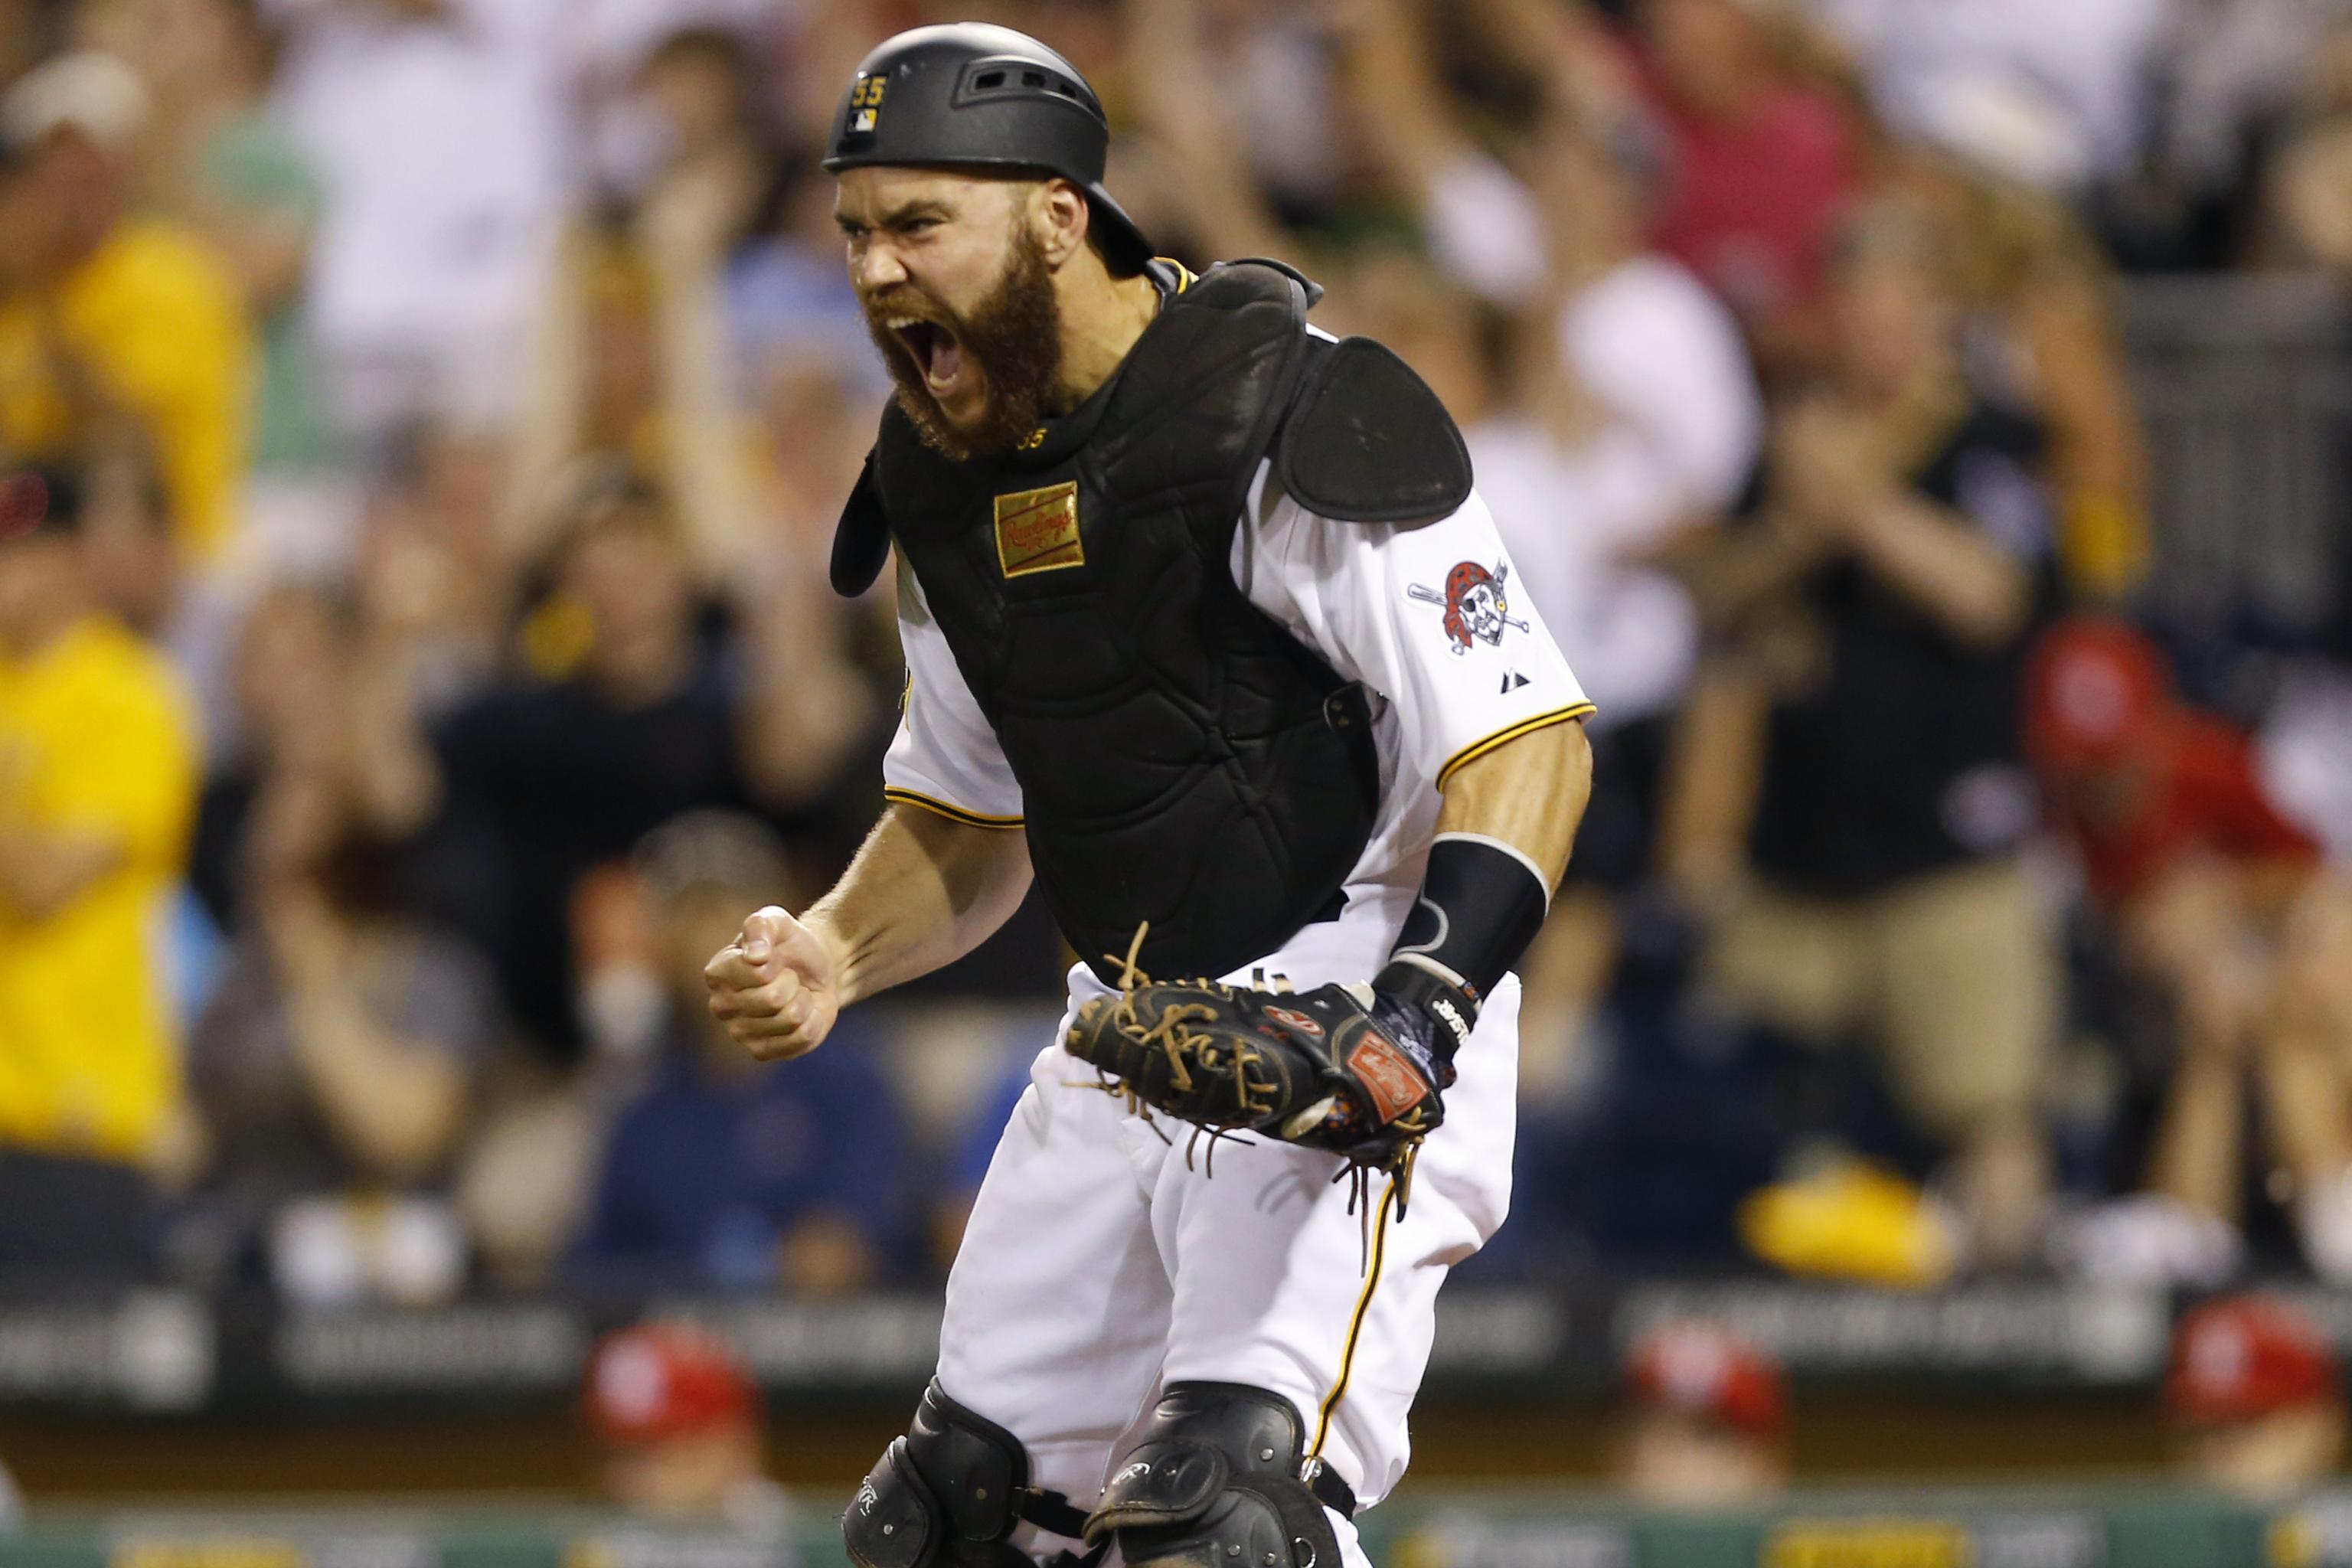 Five years after 'Re-sign Russ,' Russell Martin takes the field at PNC Park